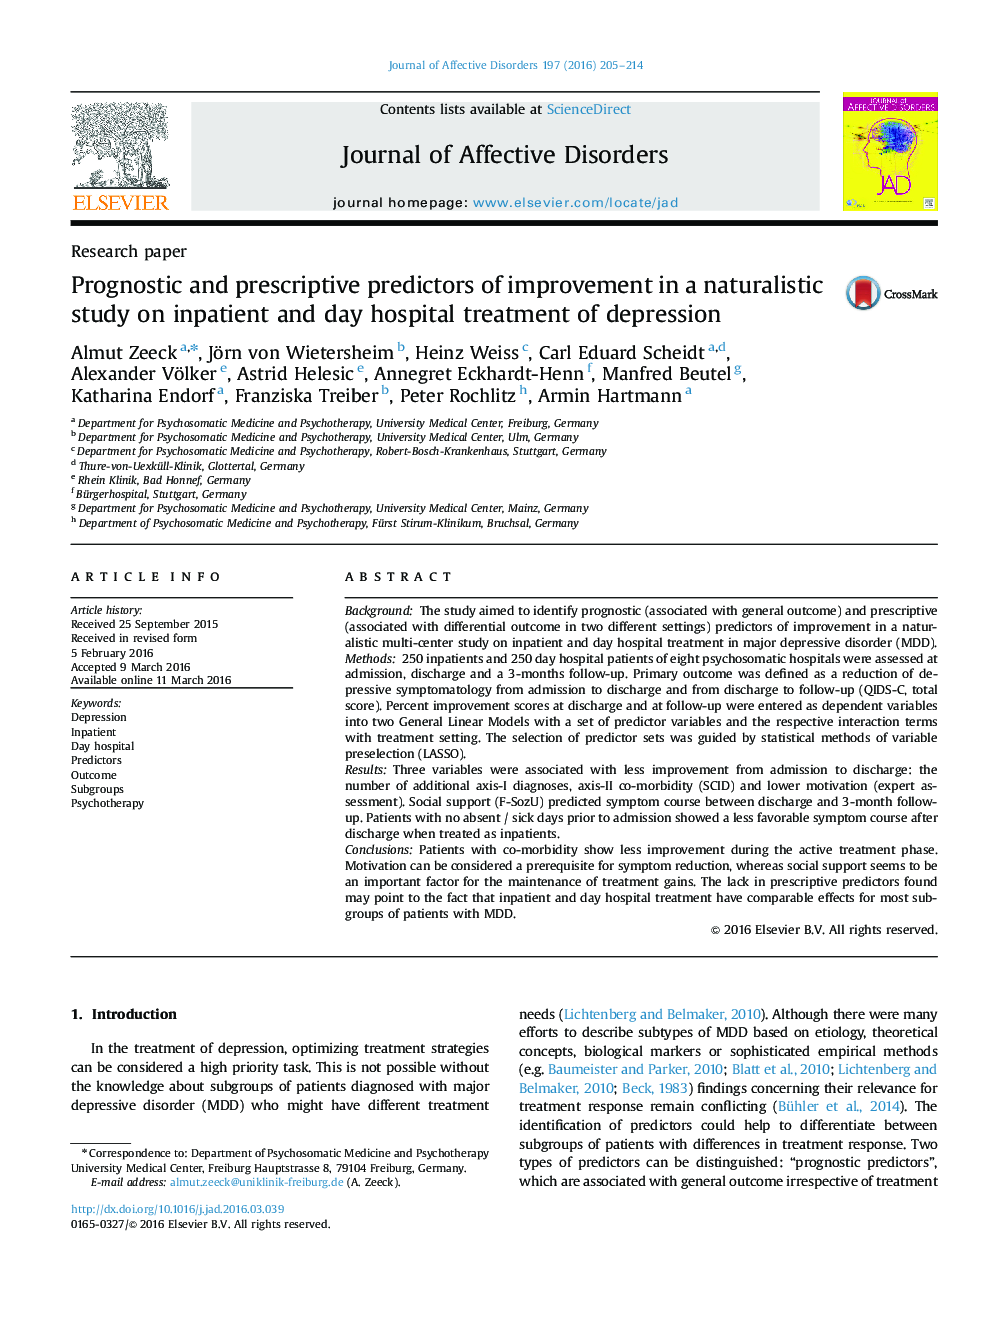 Prognostic and prescriptive predictors of improvement in a naturalistic study on inpatient and day hospital treatment of depression